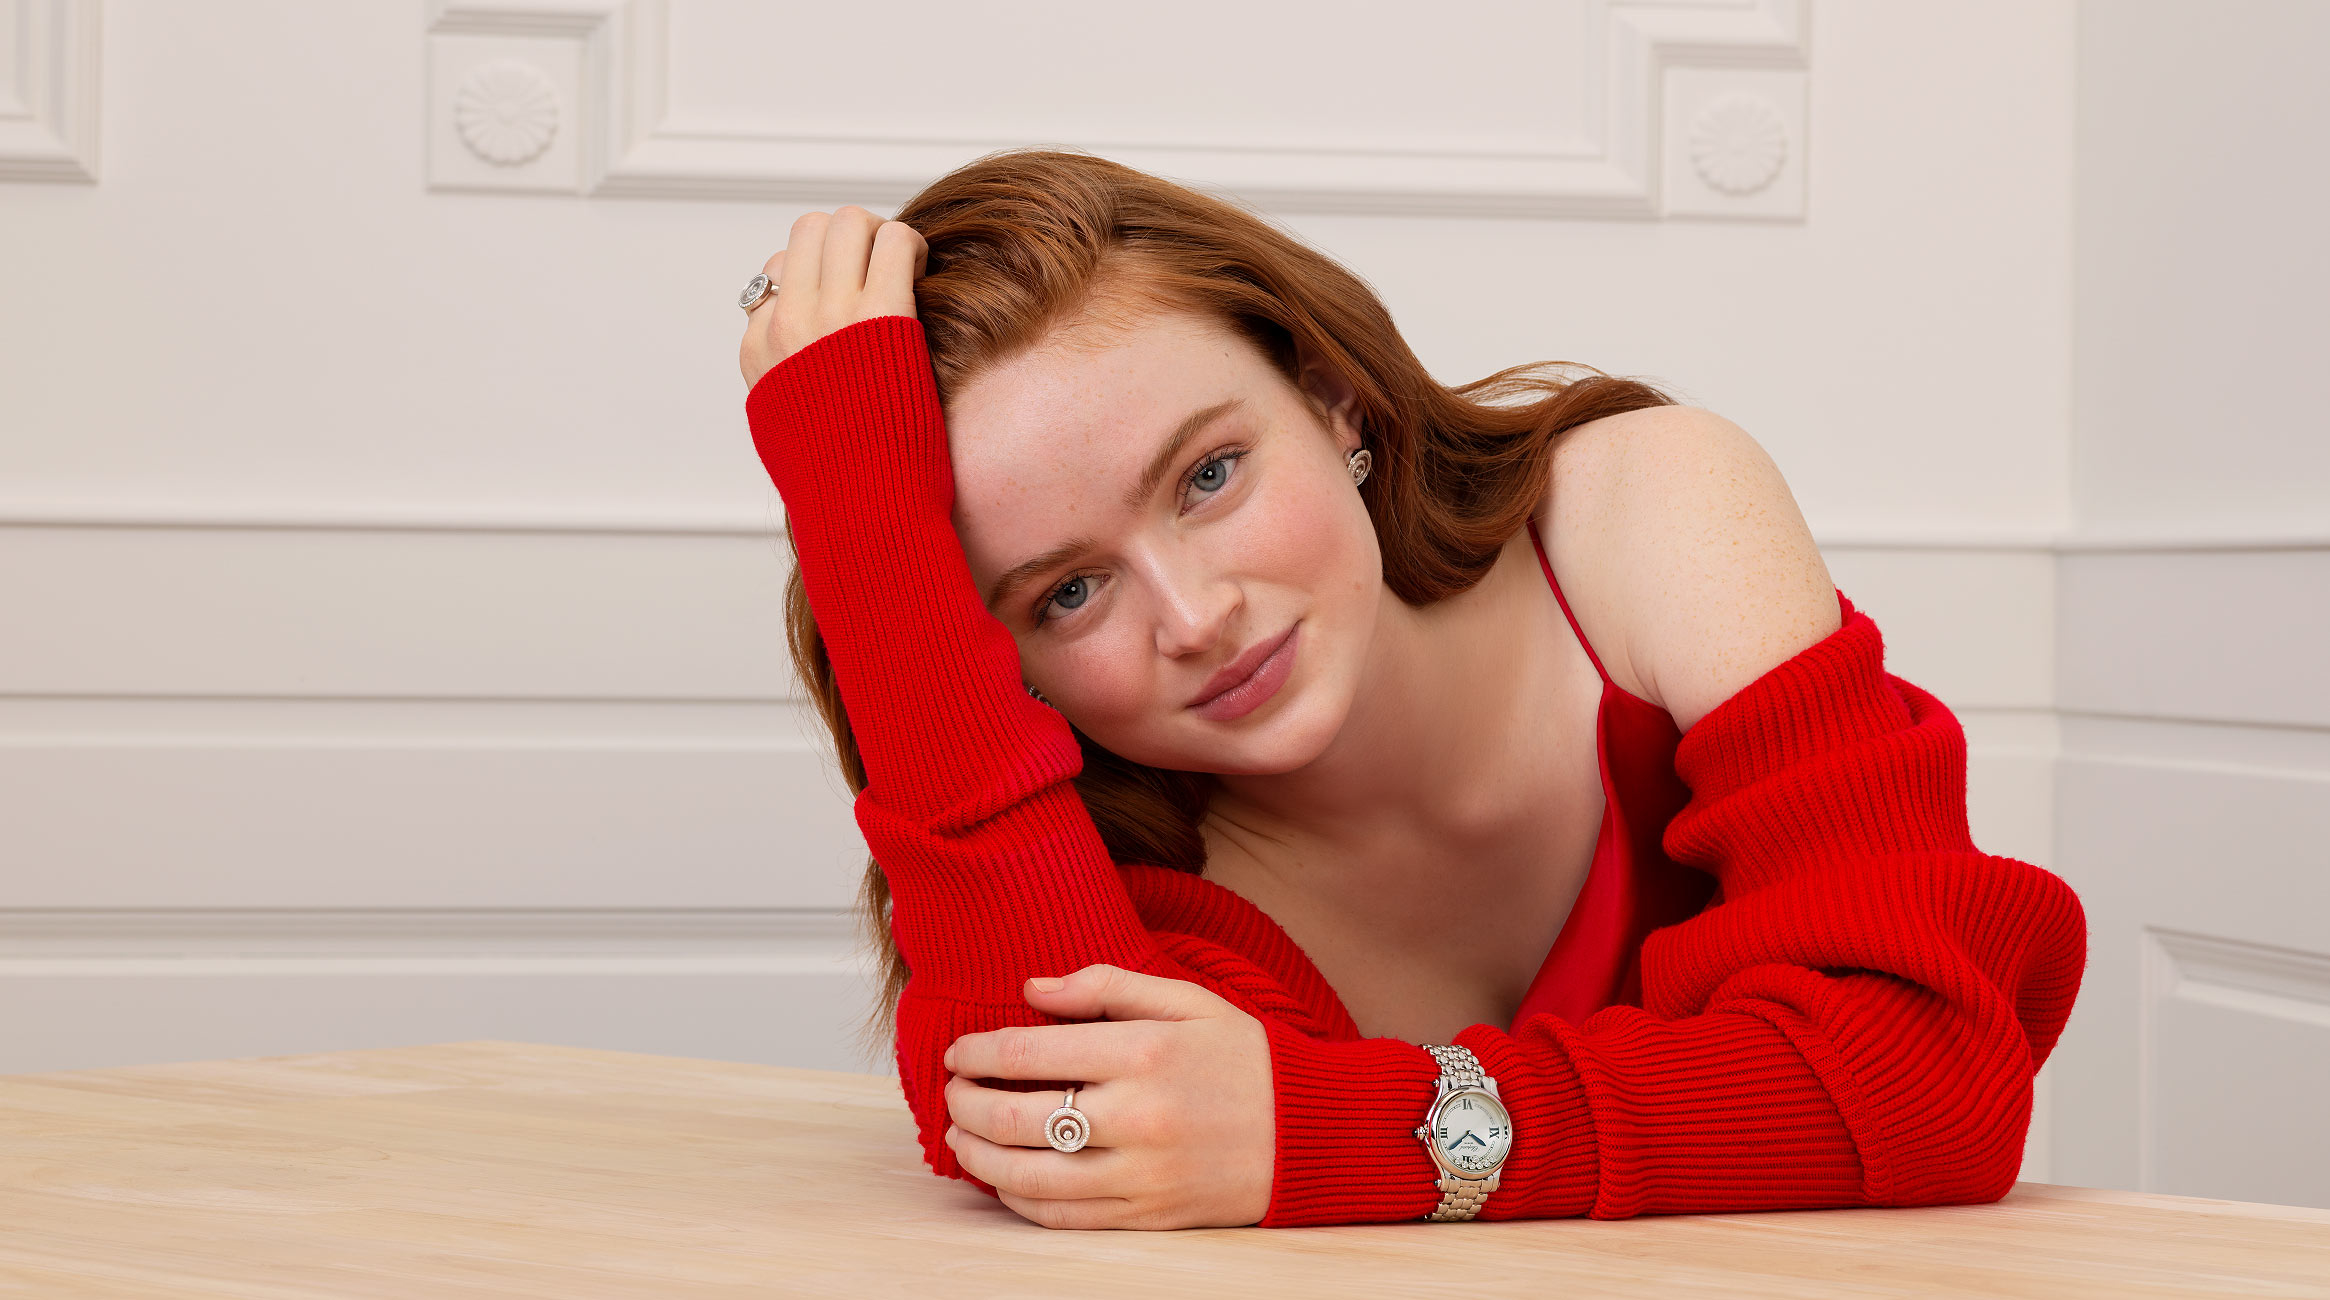 Sadie Sink's Dating Life and Sexuality Explored